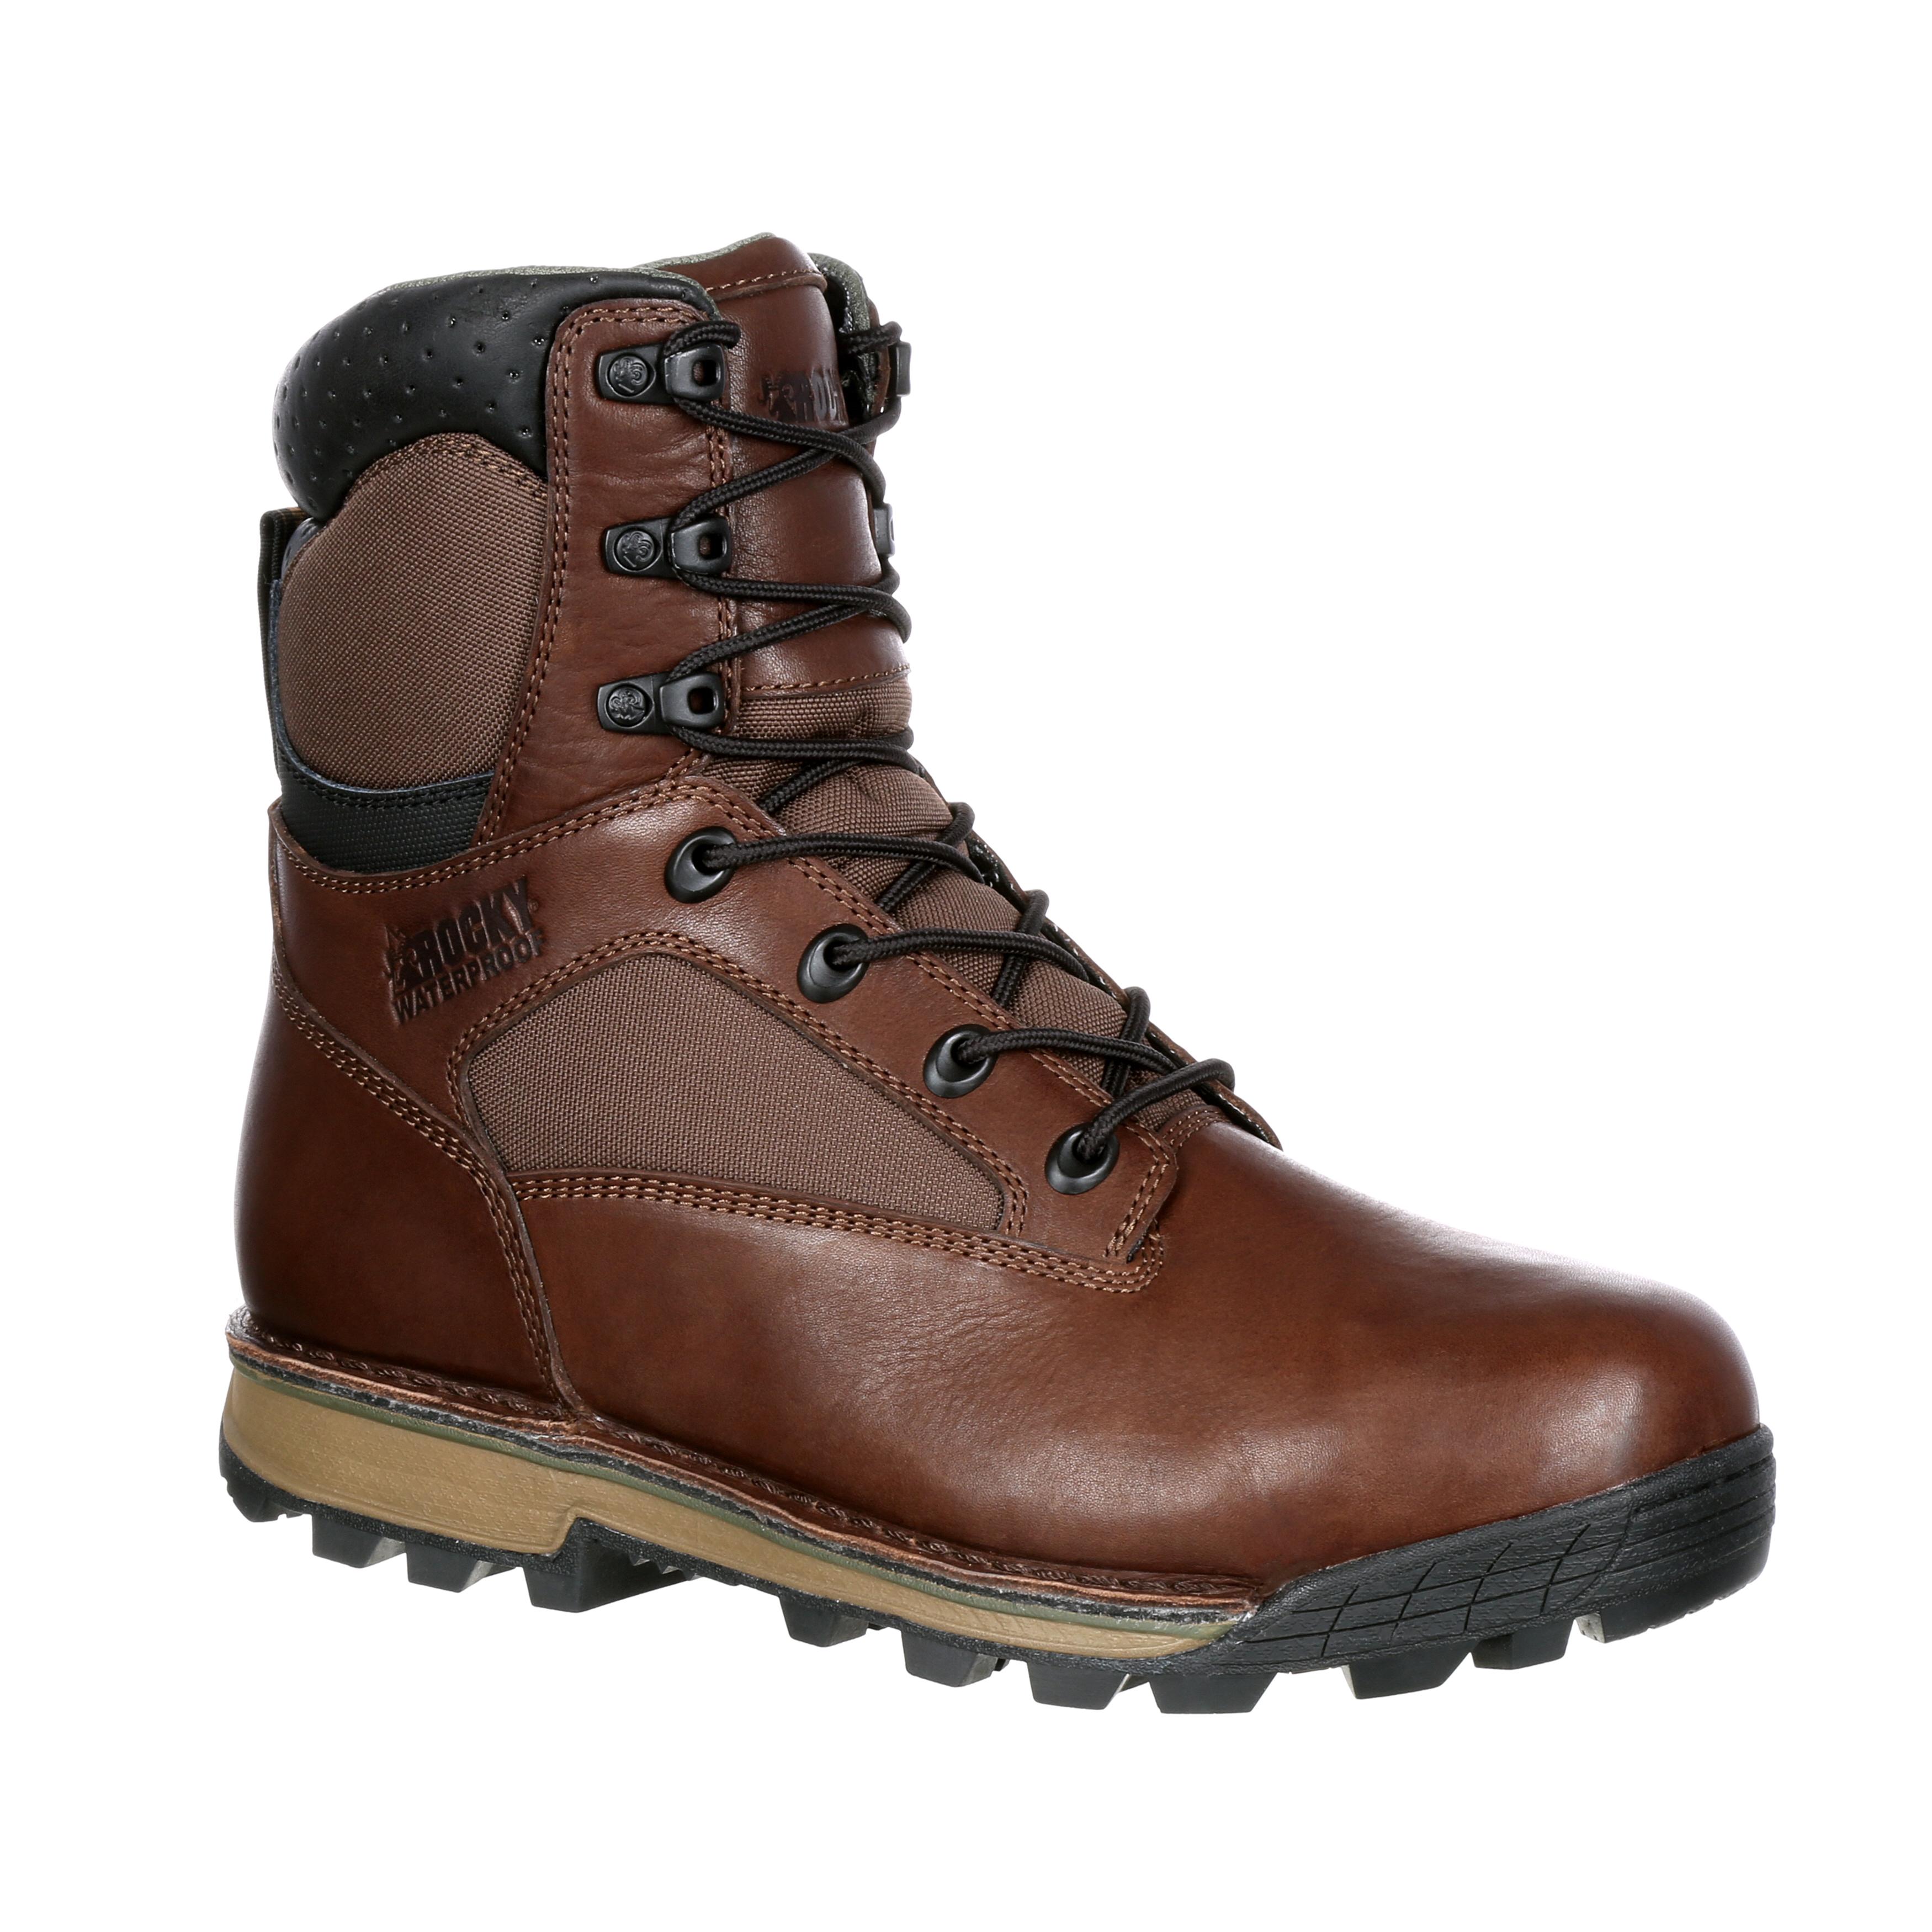 Rocky Traditions: Men's Waterproof Insulated Outdoor Boot